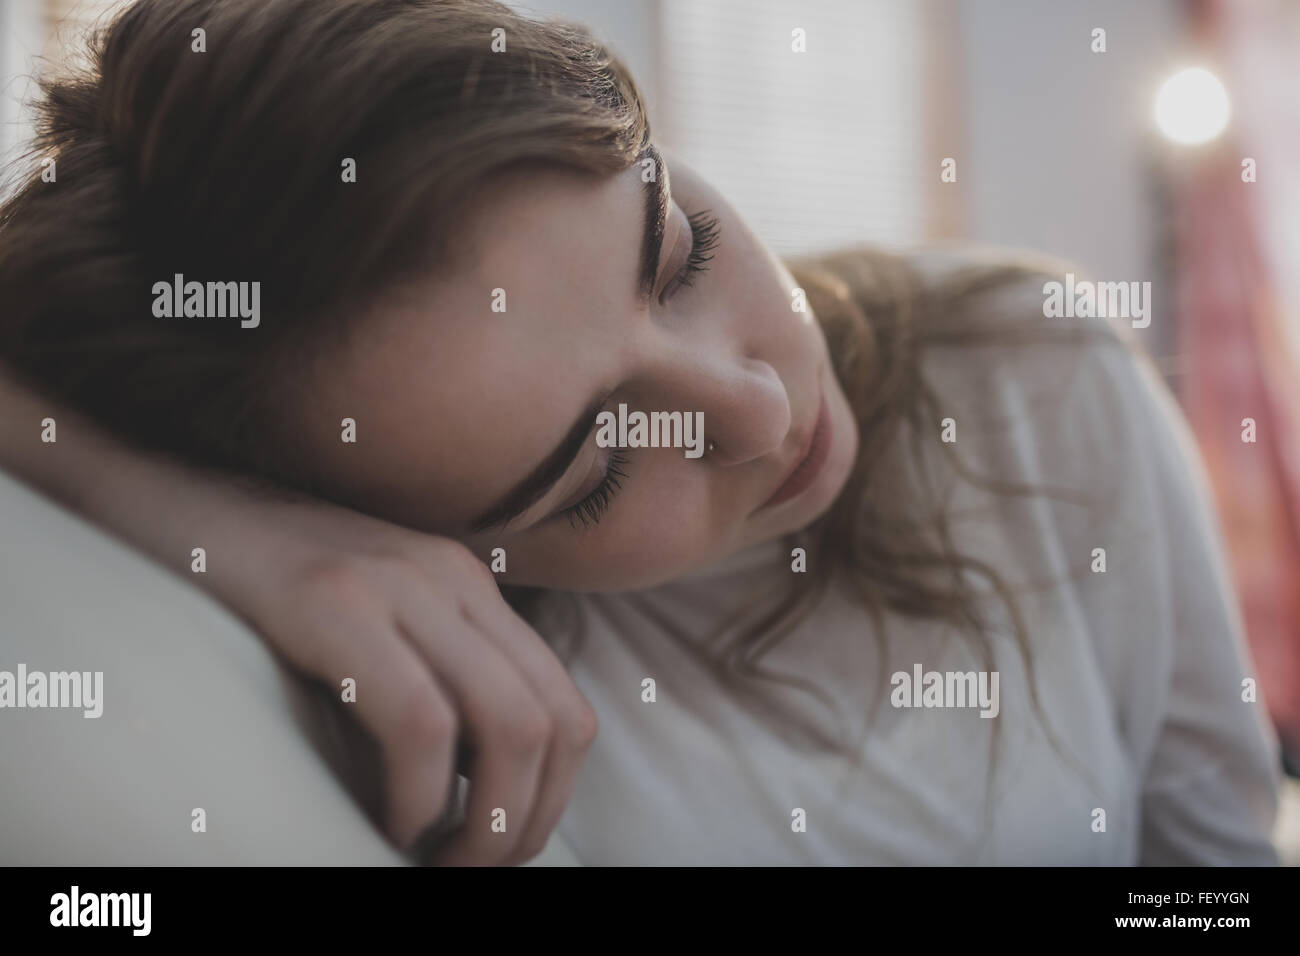 Tired woman falling asleep on the couch Stock Photo